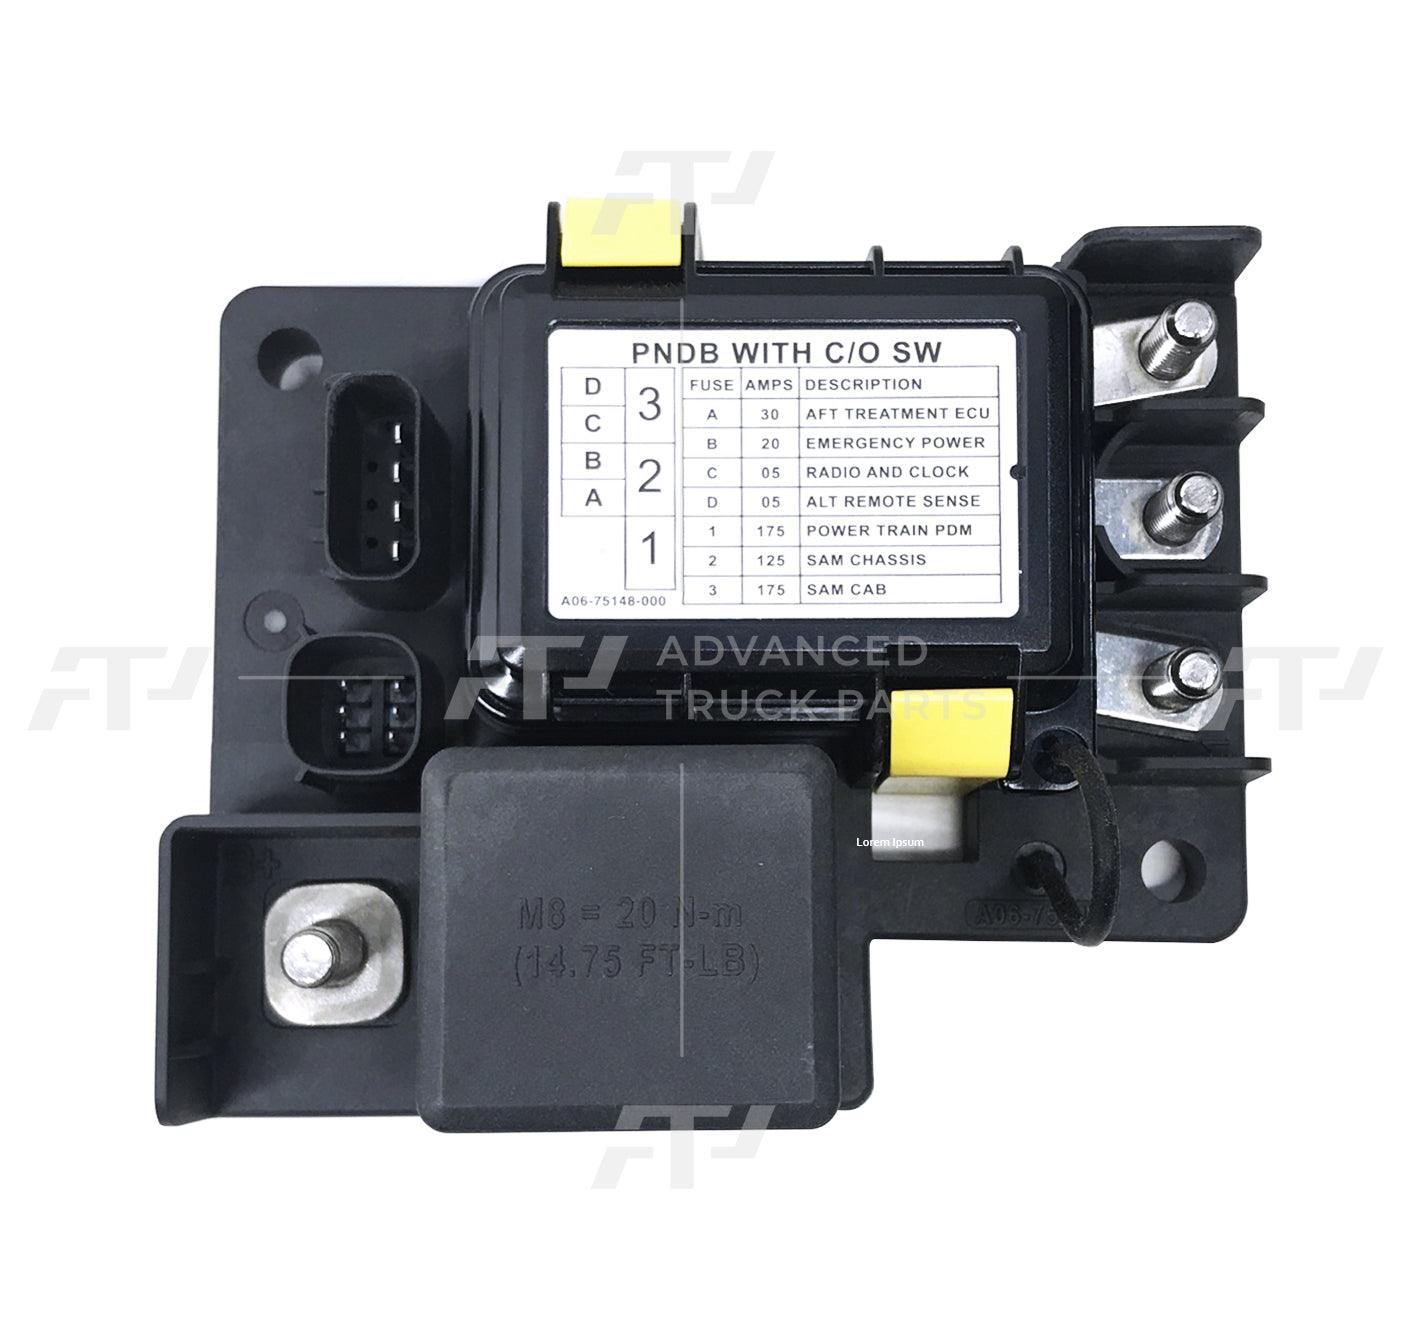 A66-03714-000 Genuine Freightliner Junction Box - With Cutoff Switch - ADVANCED TRUCK PARTS